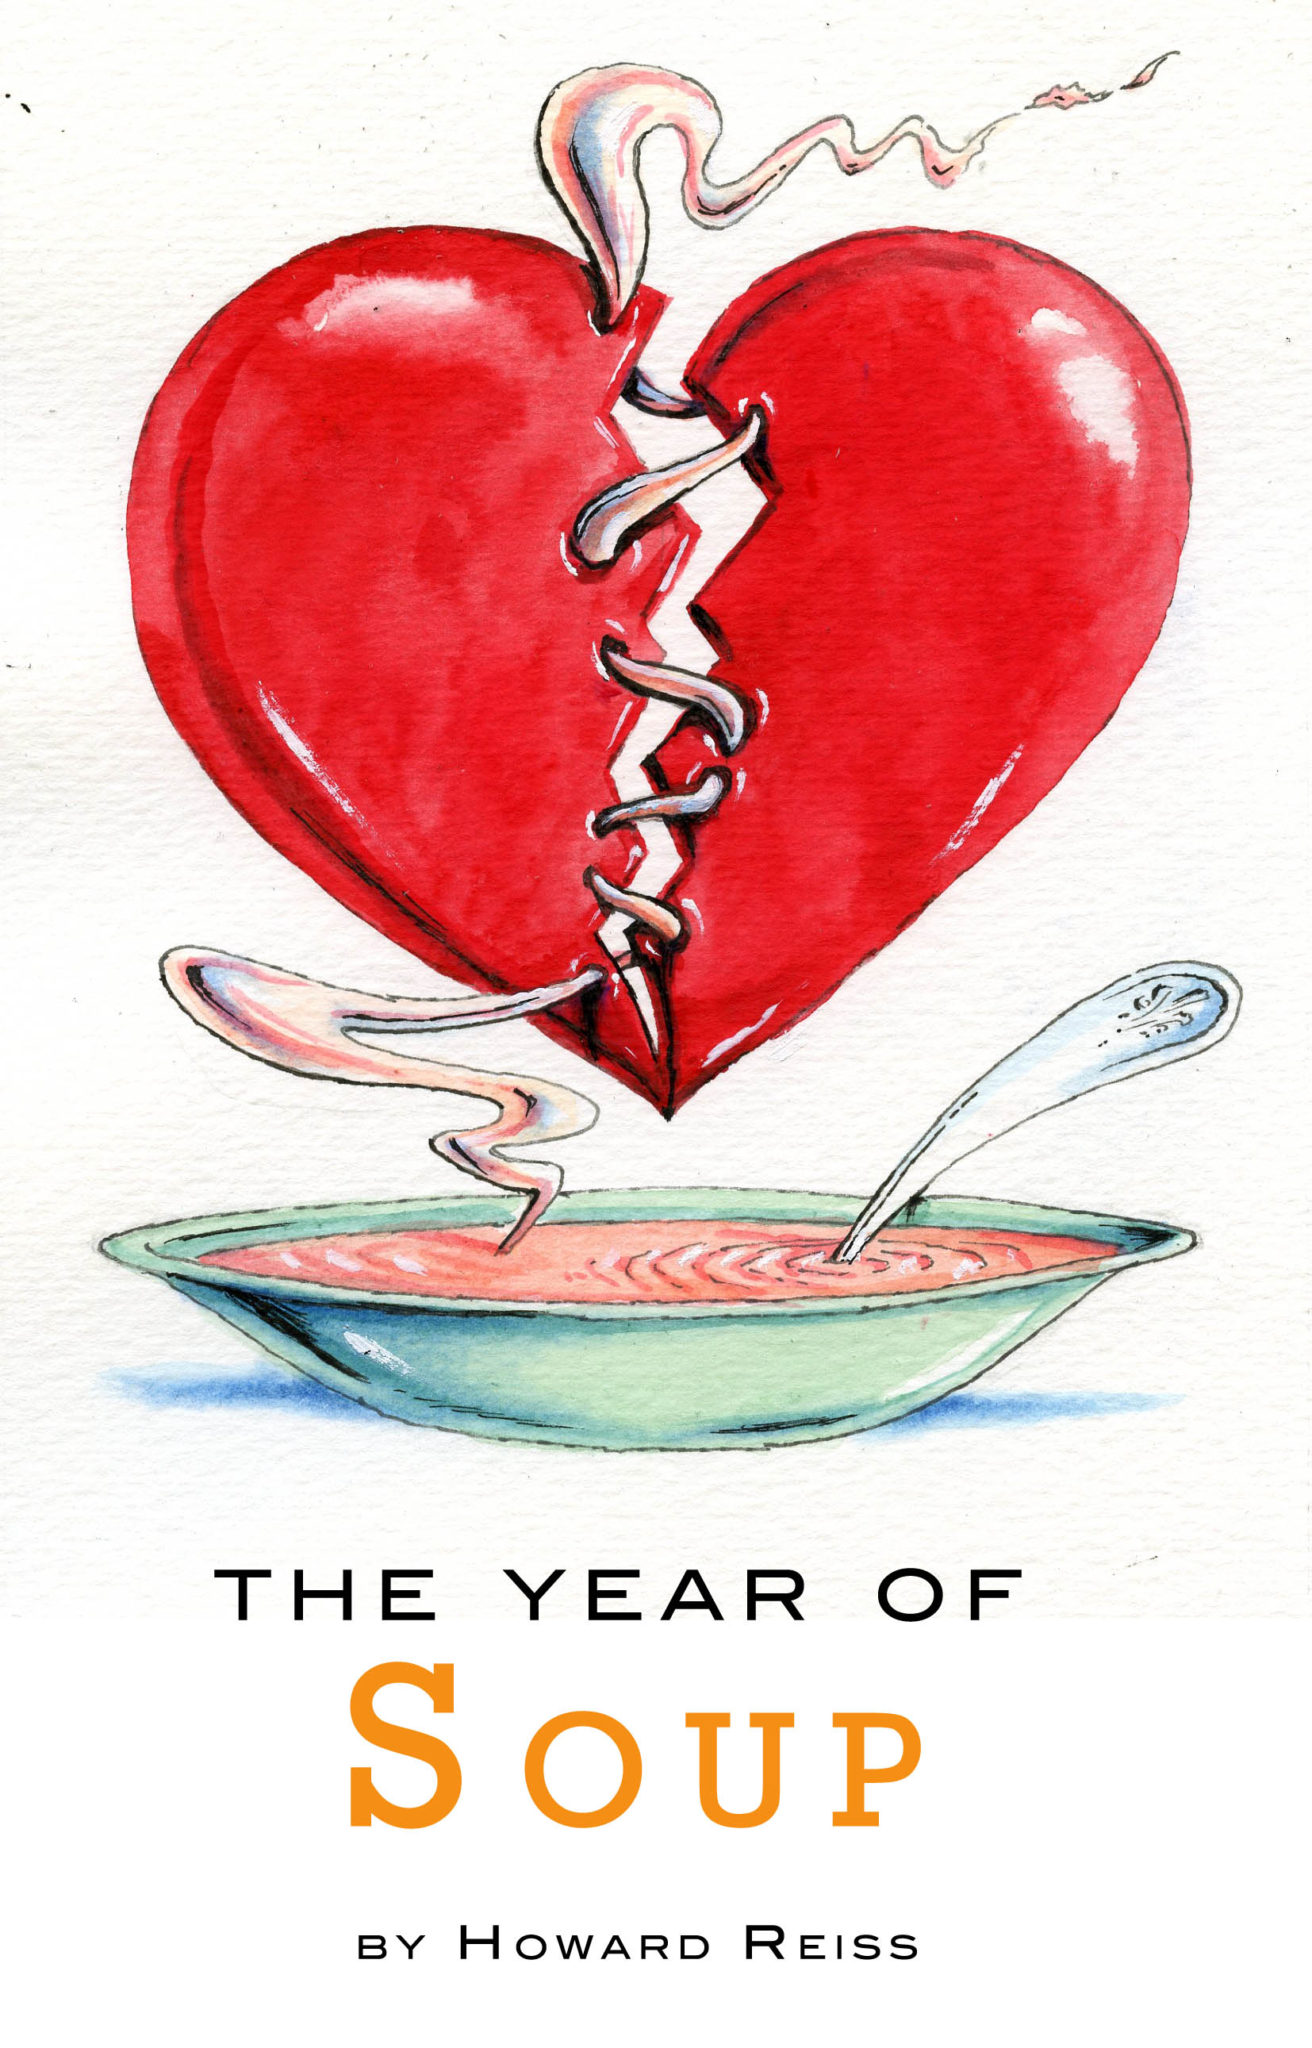 The Year of Soup by Howard Reiss